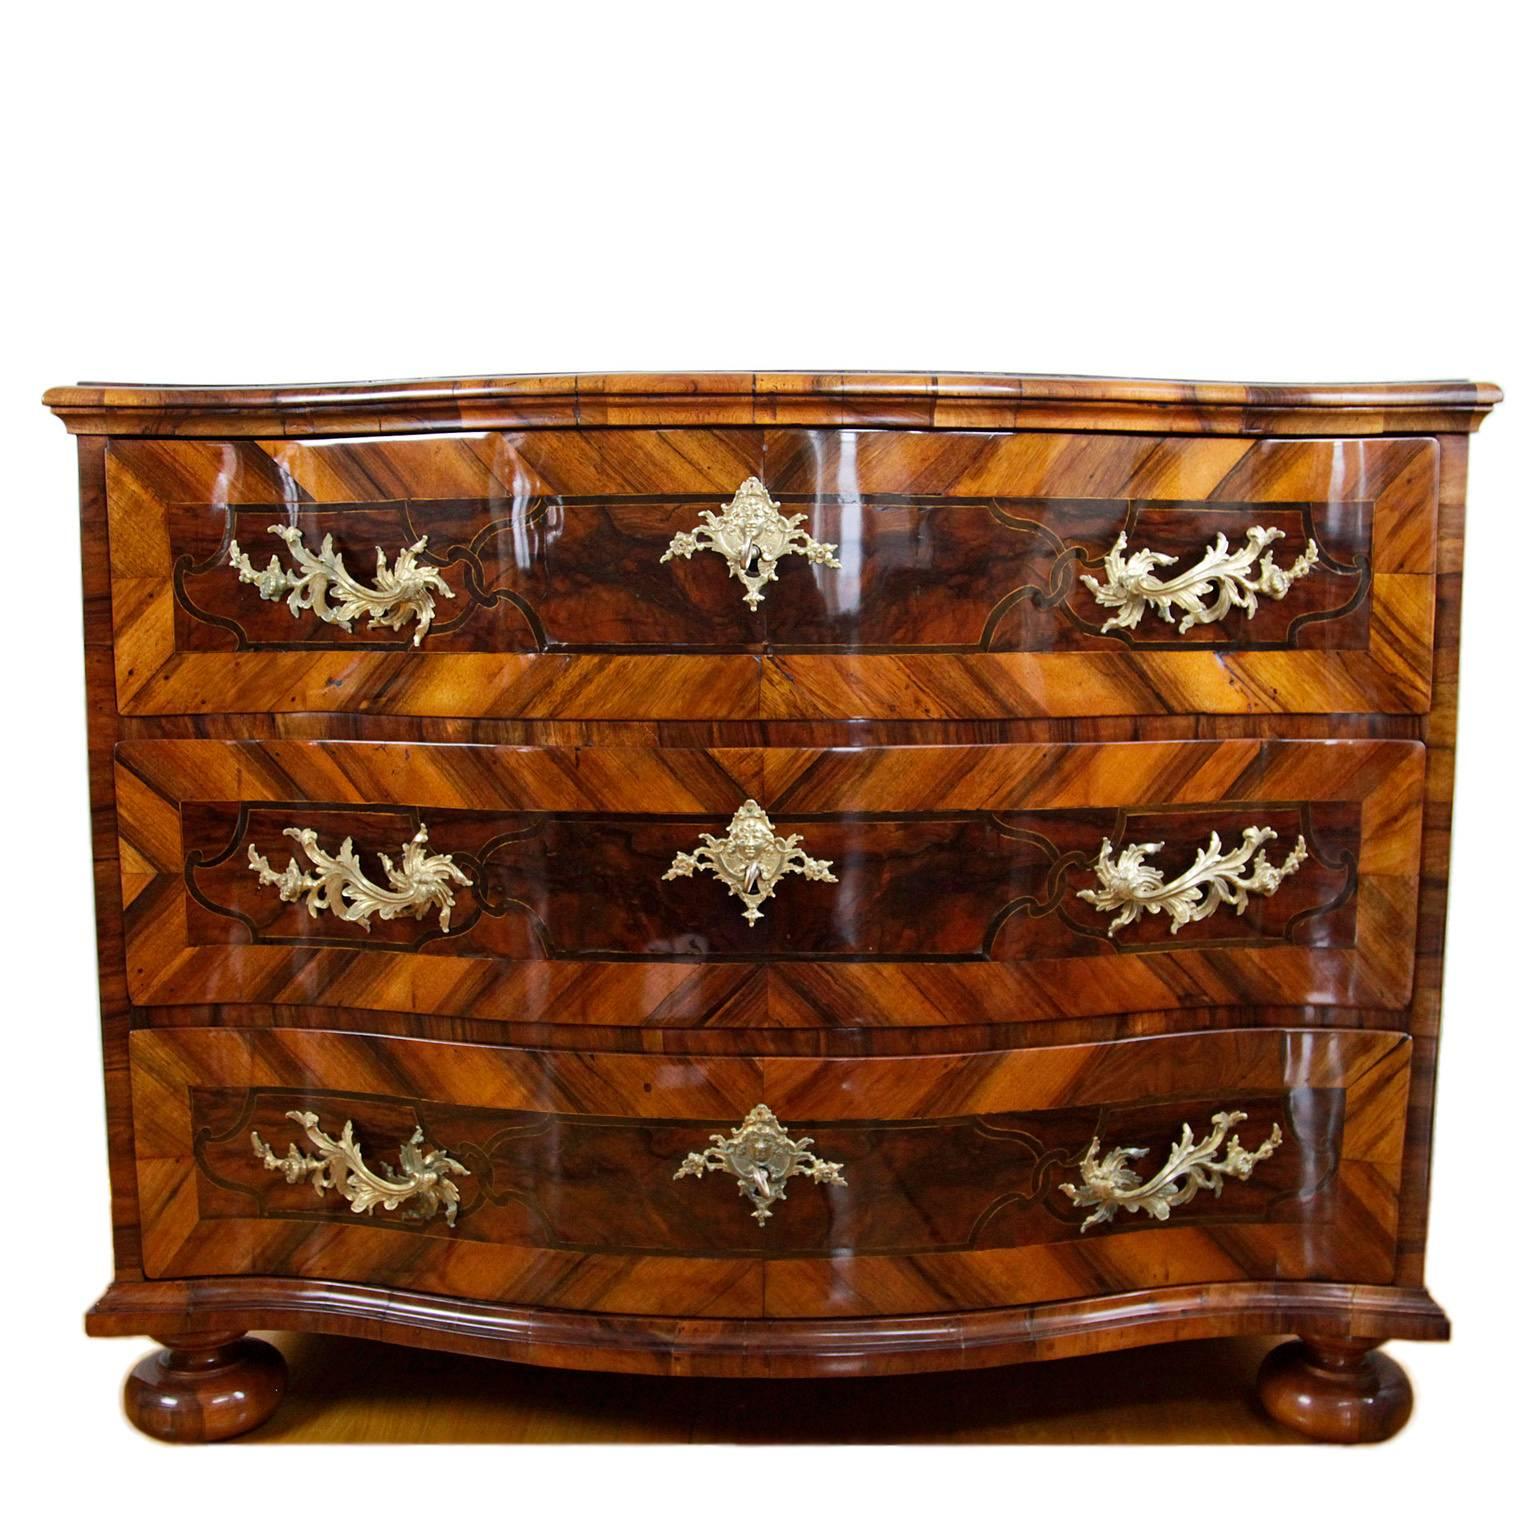 Exceptional Baroque chest of drawers from Munich, circa 1770 with a serpentine front. Walnut veneer with beautiful inlays and ormolu fittings.

 